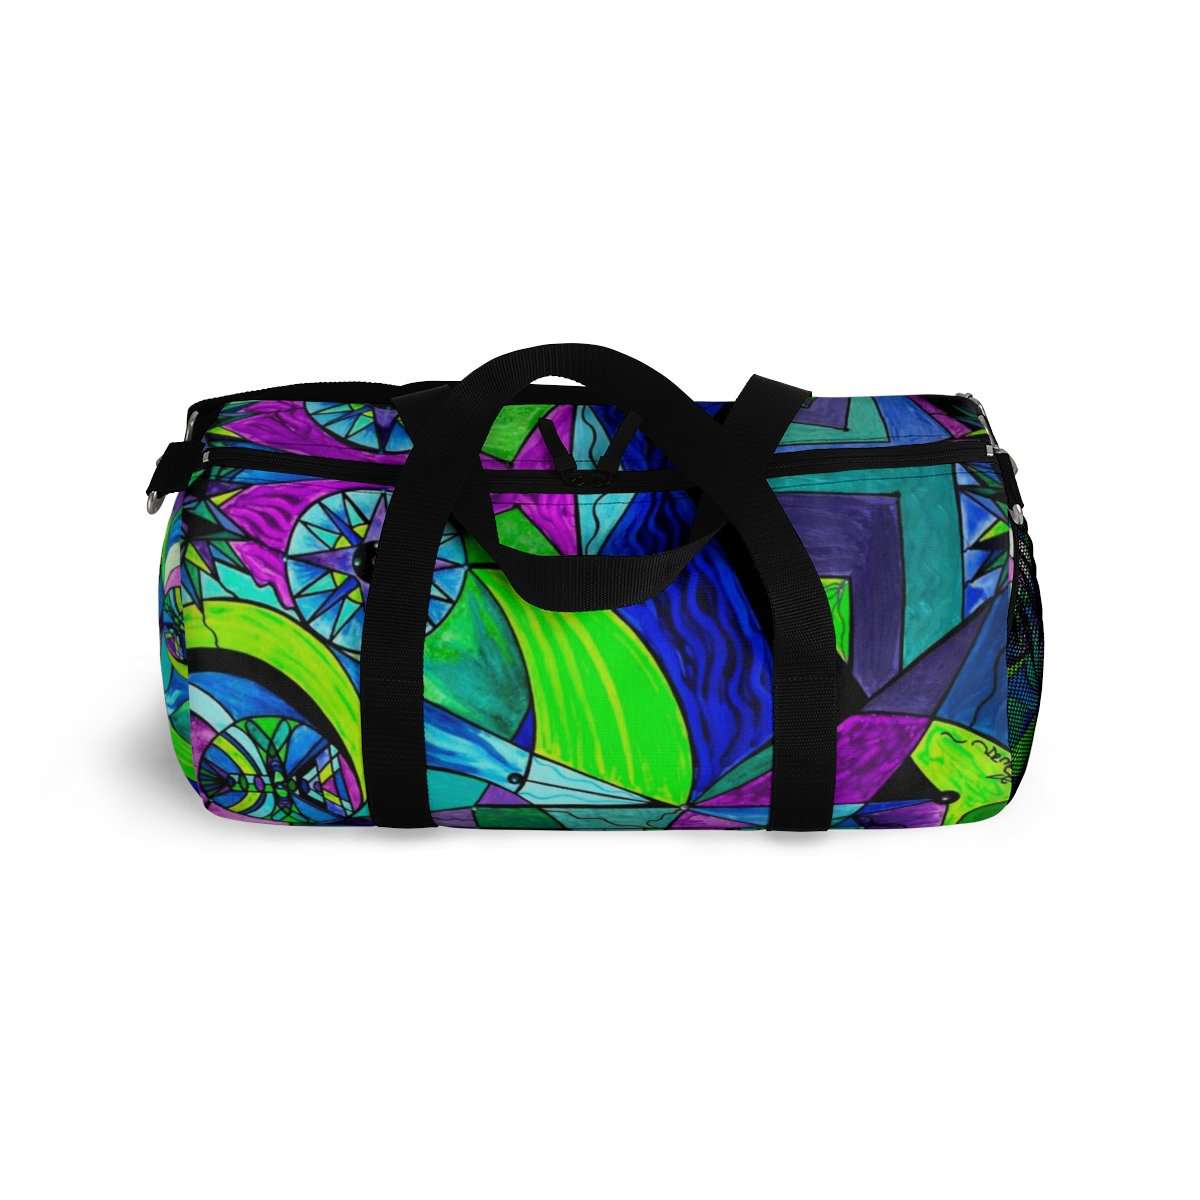 shop-online-and-get-your-favourite-arcturian-astral-travel-grid-duffle-bag-online_4.jpg